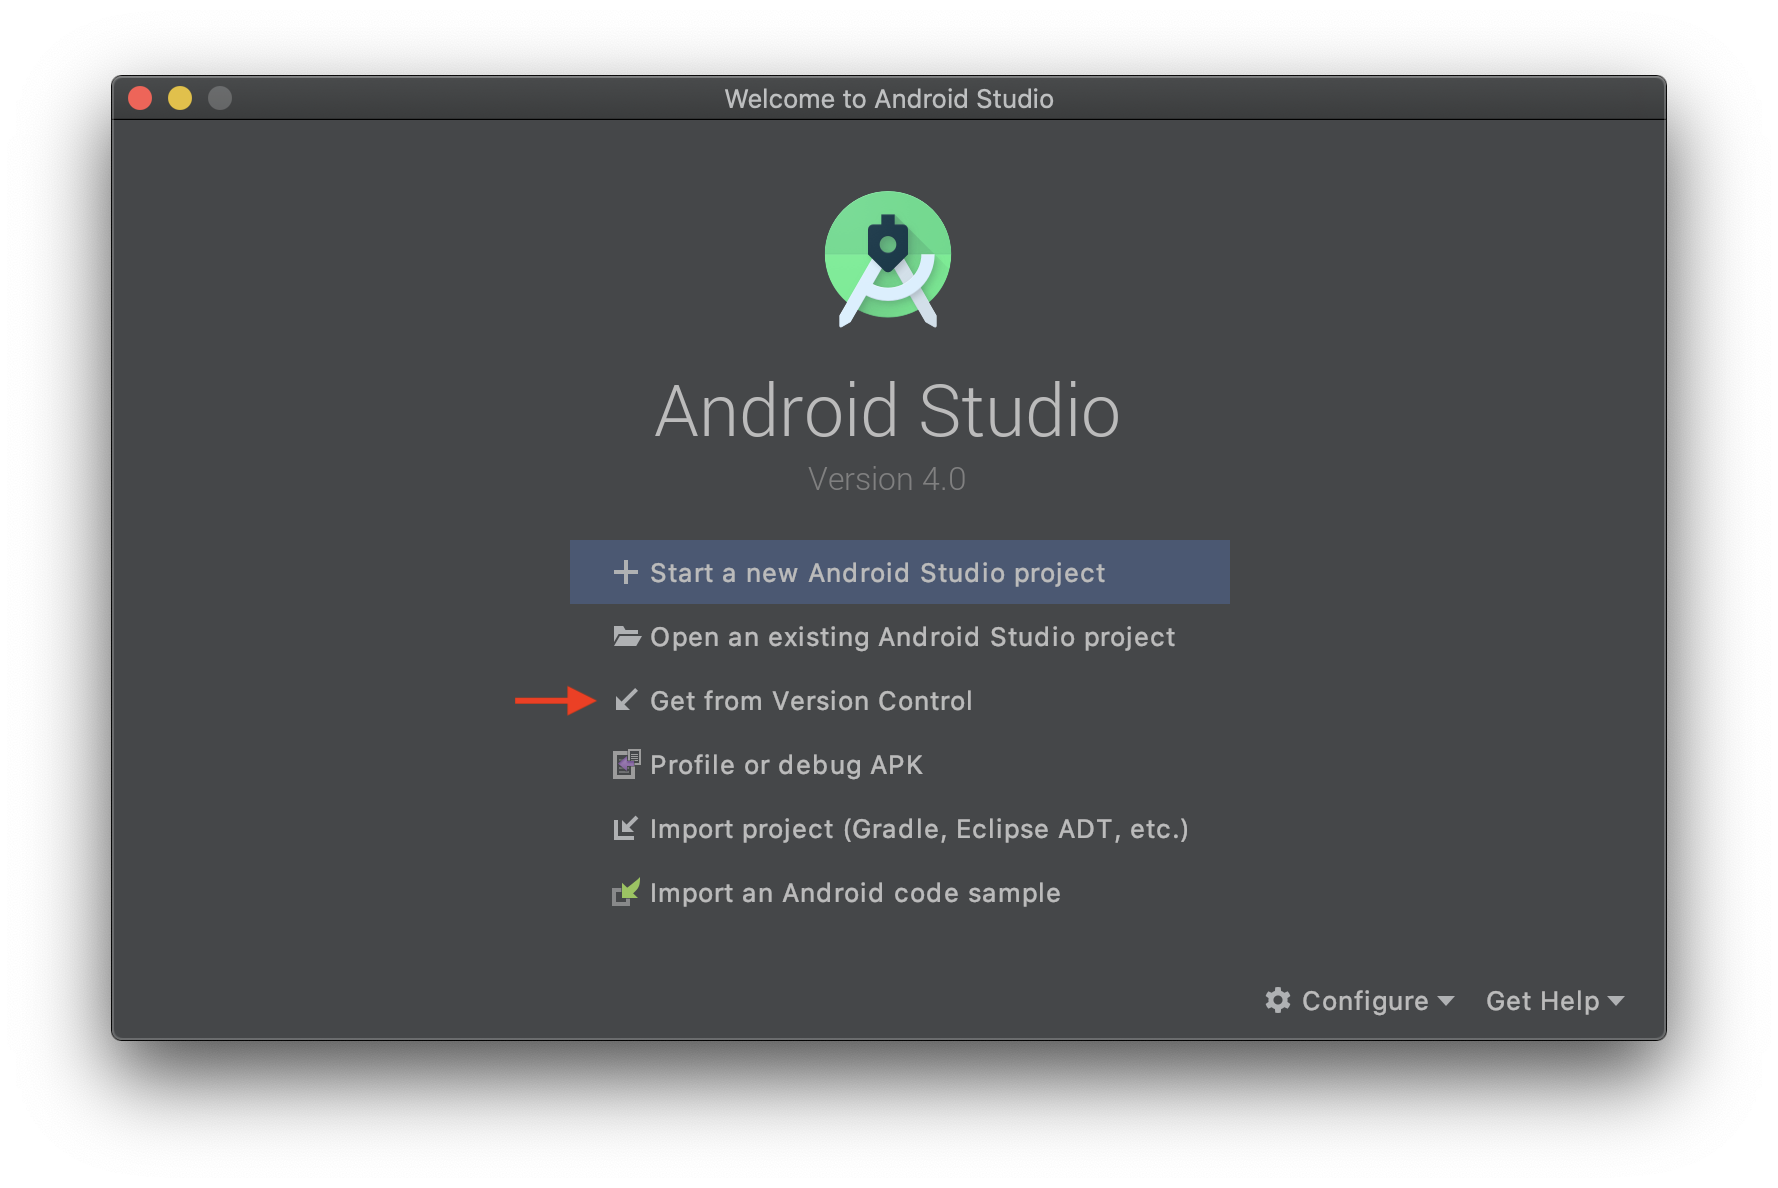 Image shows Android Studio welcome screen with an arrow to the Get from Version Control button